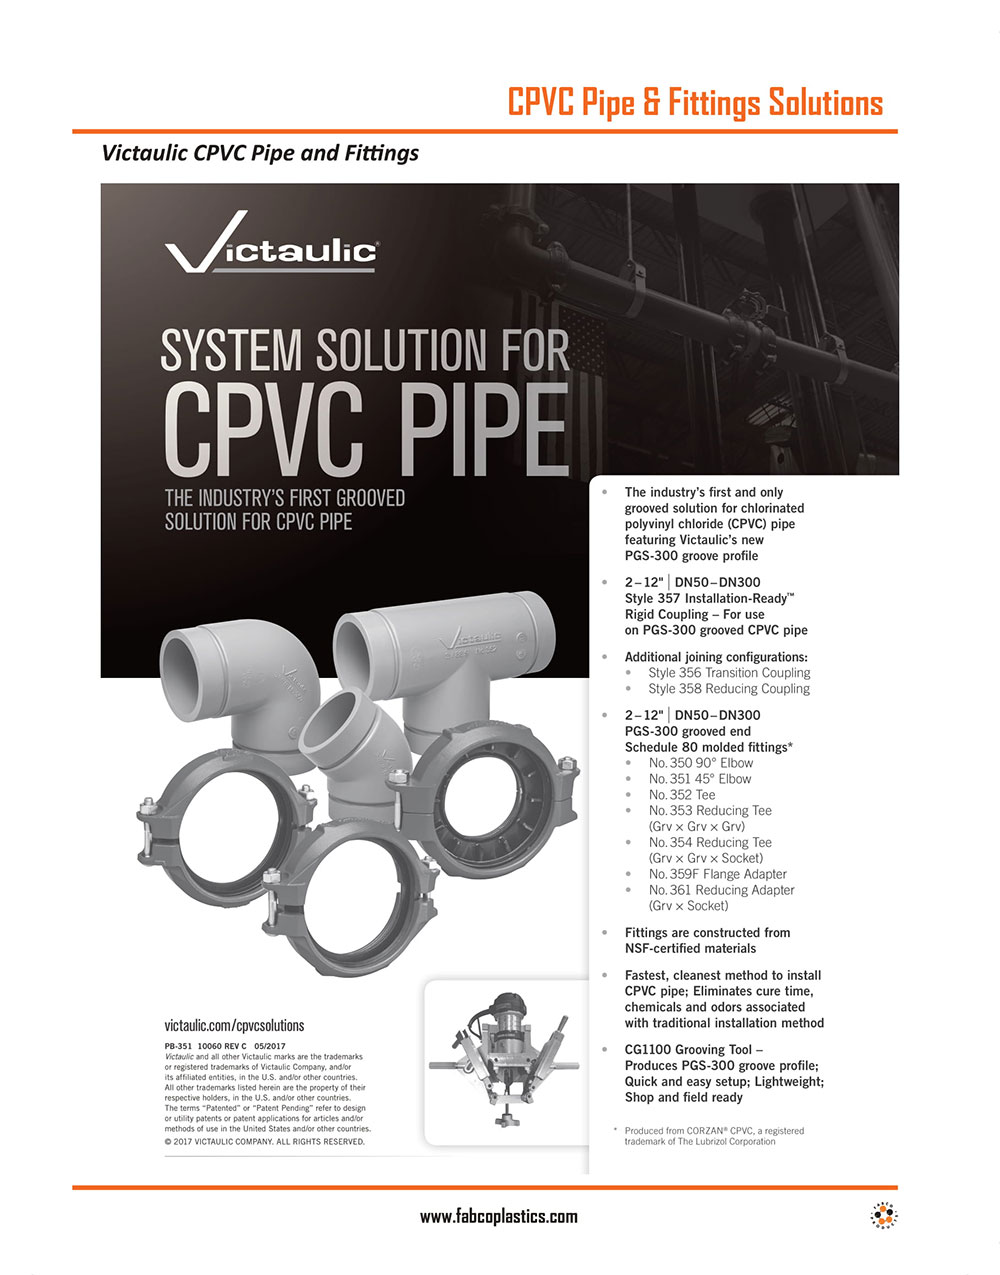 Victaulic CPVC Pipe and Fittings